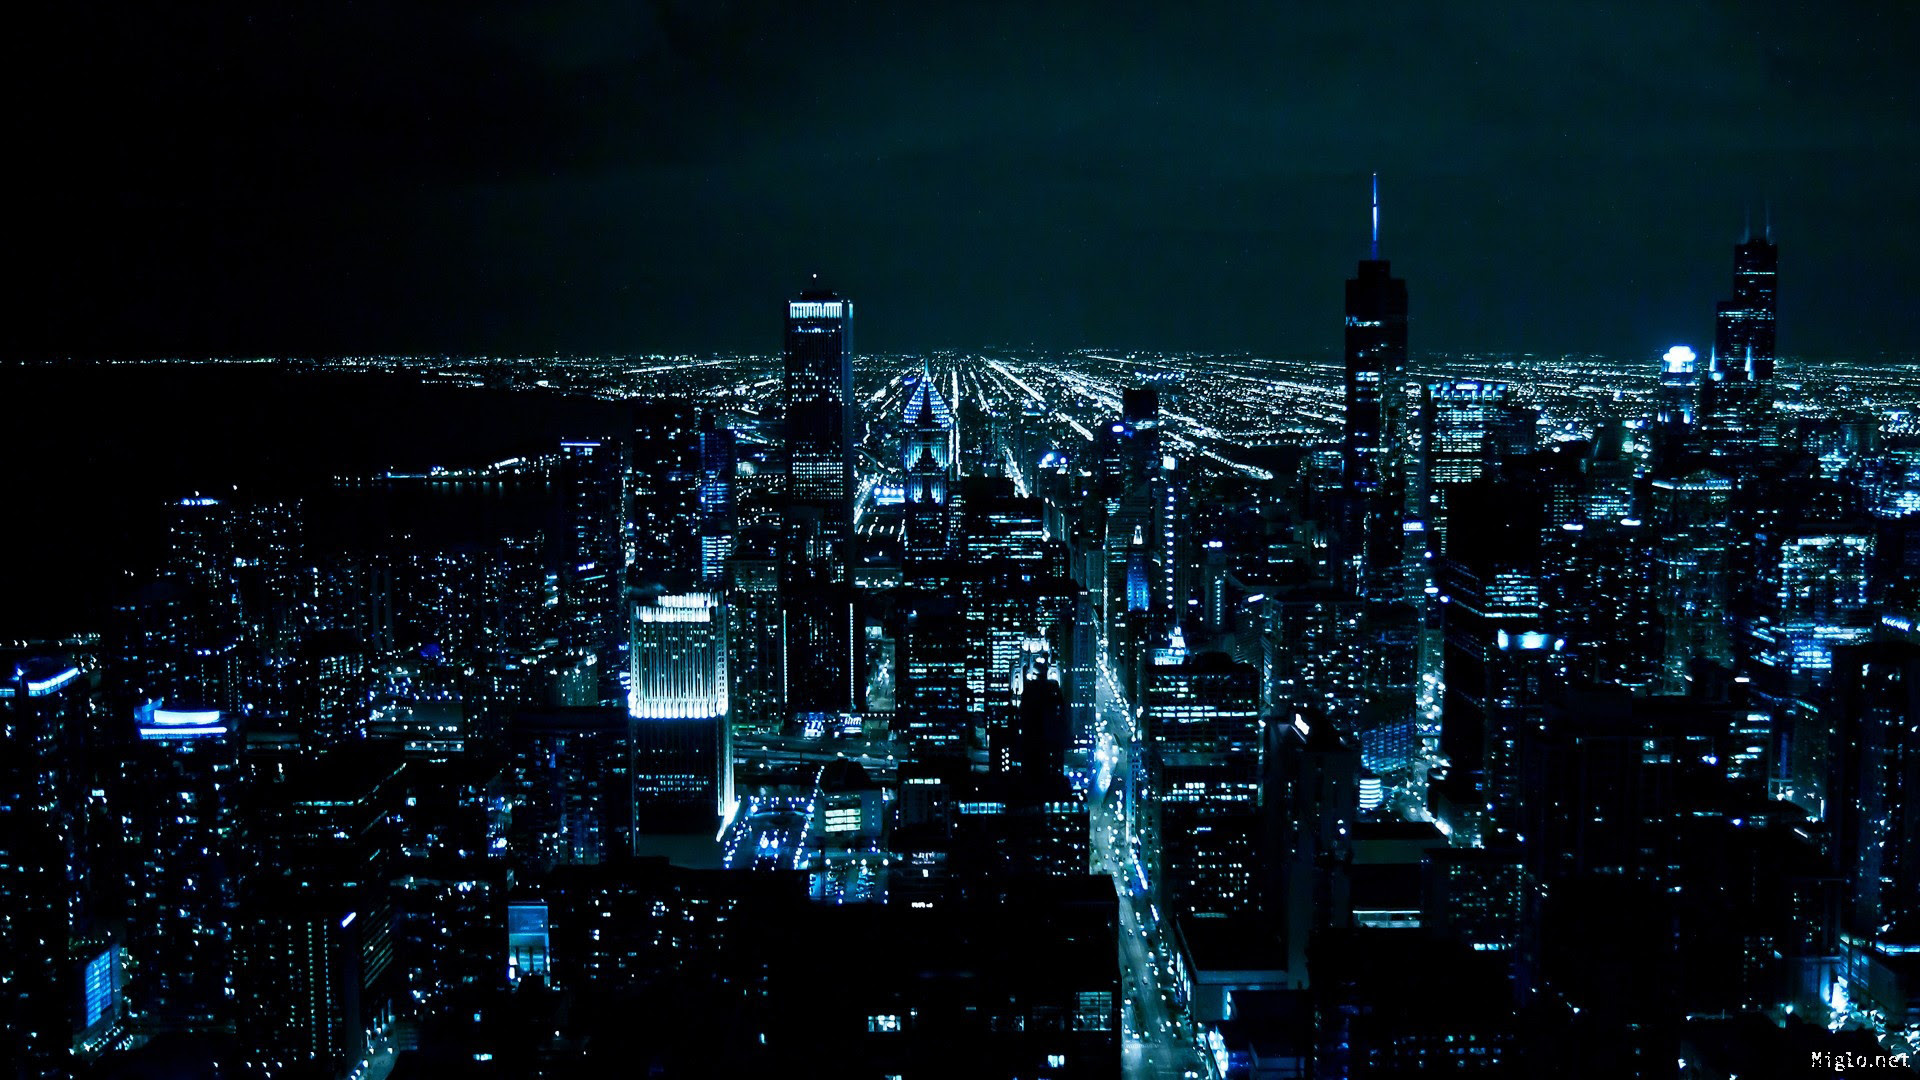 Night City Wallpaper 69 Images Images, Photos, Reviews